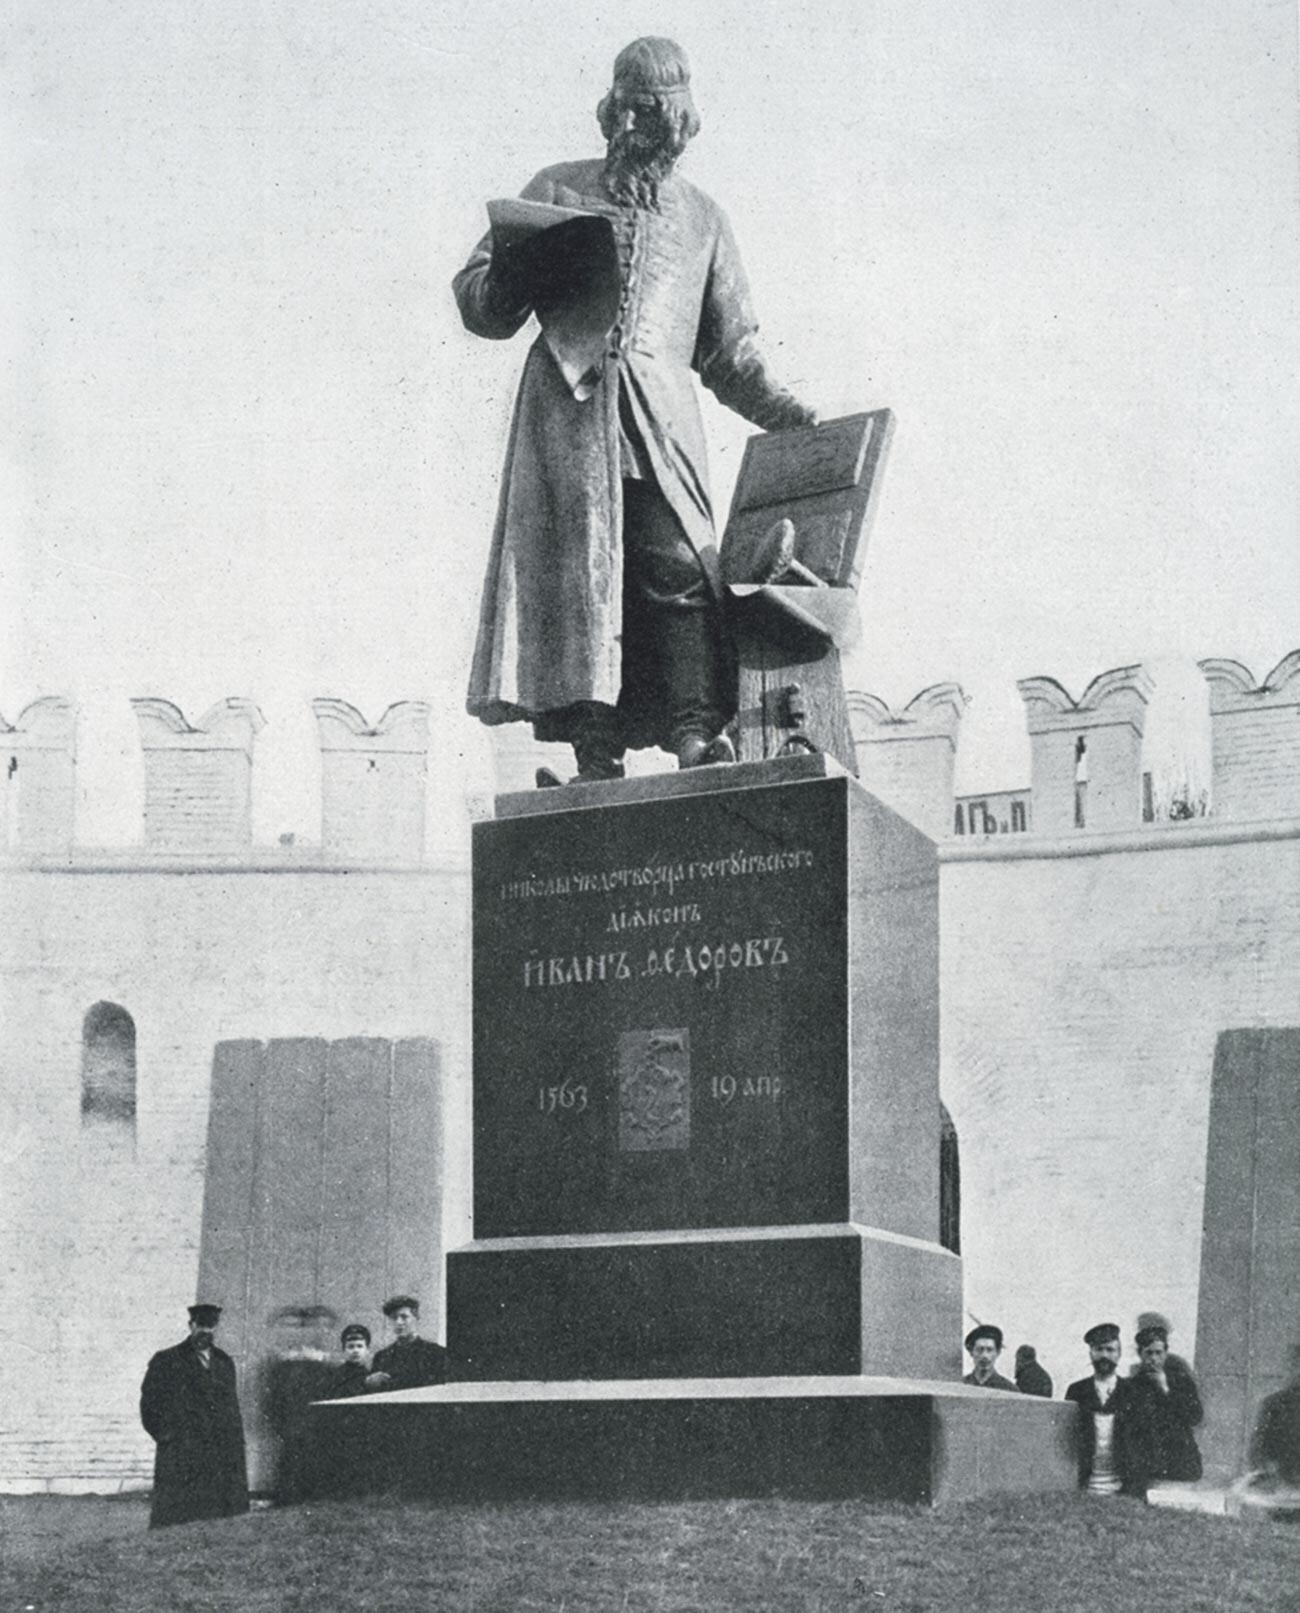 A monument to Ivan Fedorov in Moscow, 1910-1912